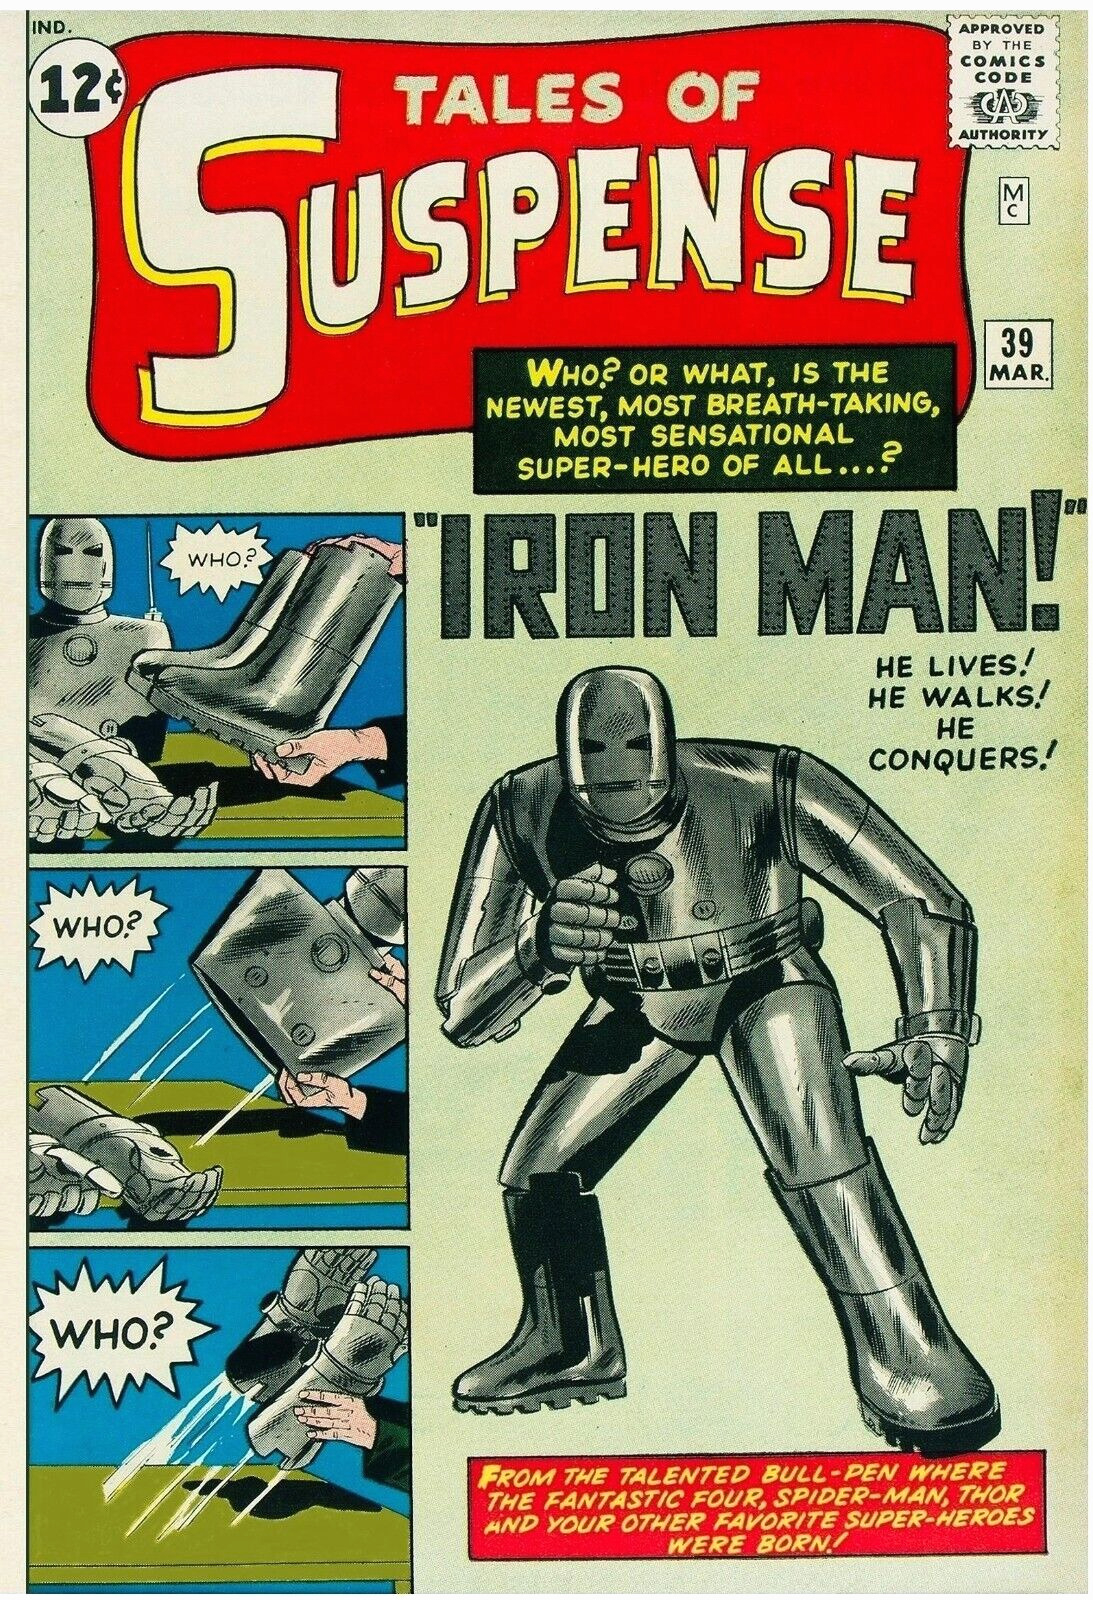 Facsimile reprint covers only to TALES OF SUSPENSE #39 - (1963)